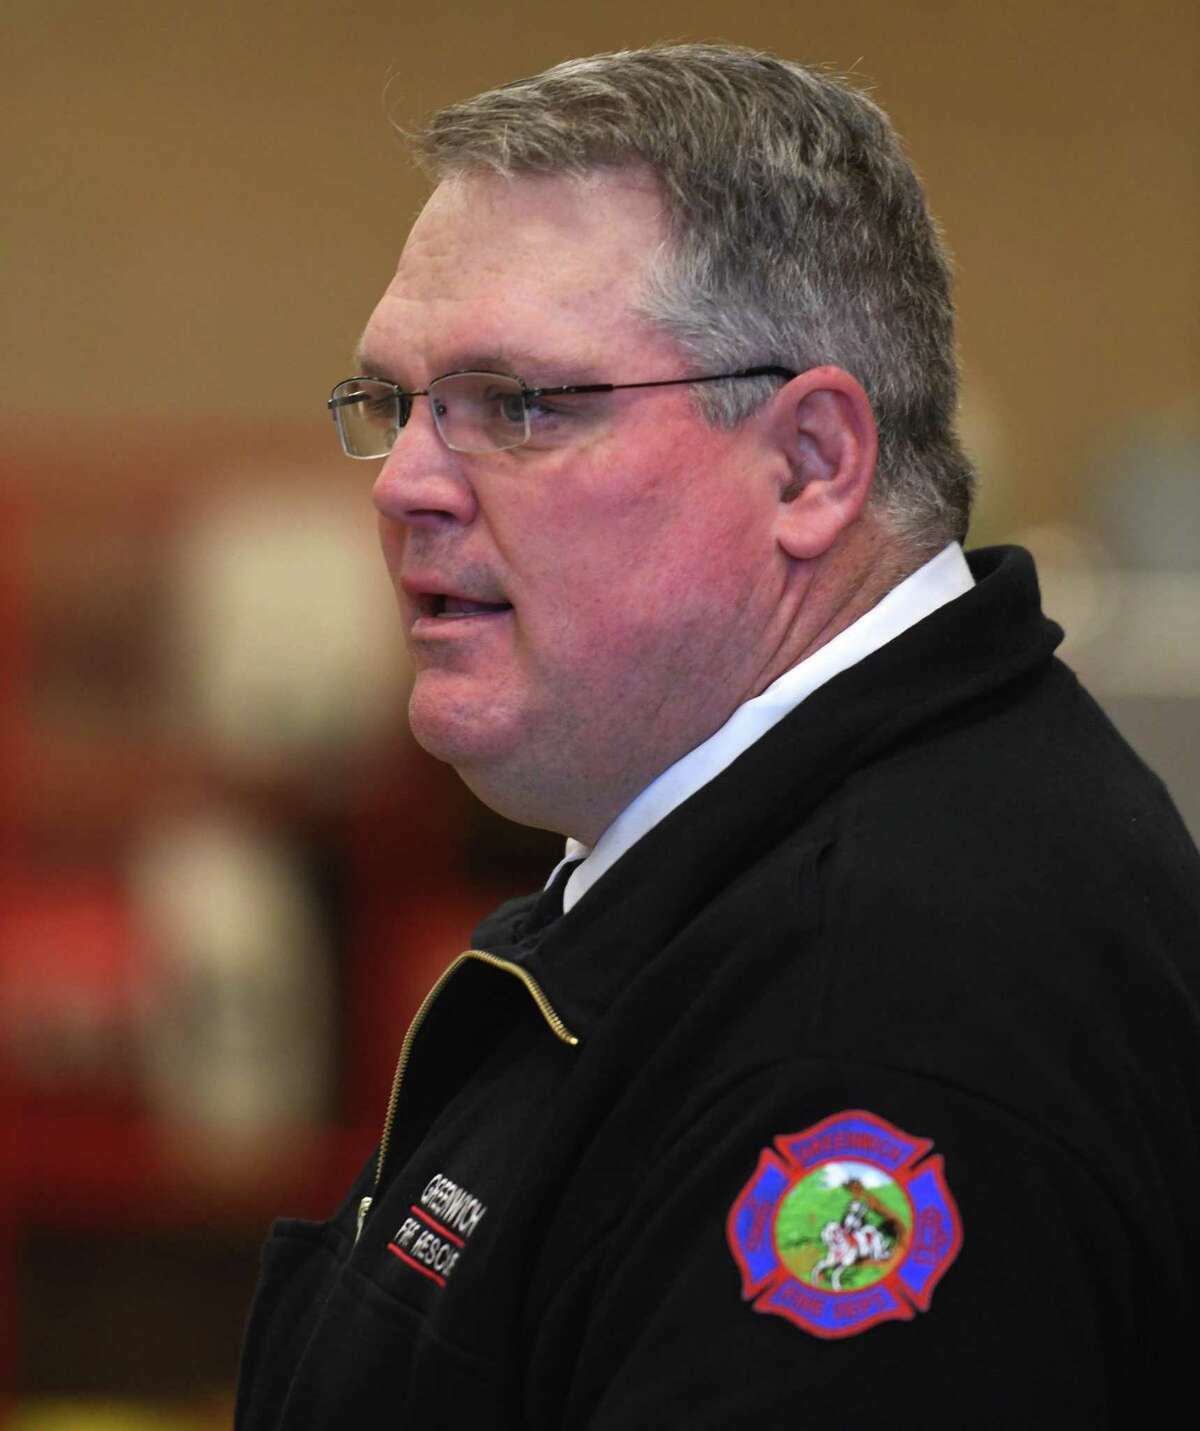 Greenwich Fire Chief Joseph McHugh discussed a new fee schedule for safety reviews with the Board of Selectmen on Monday.